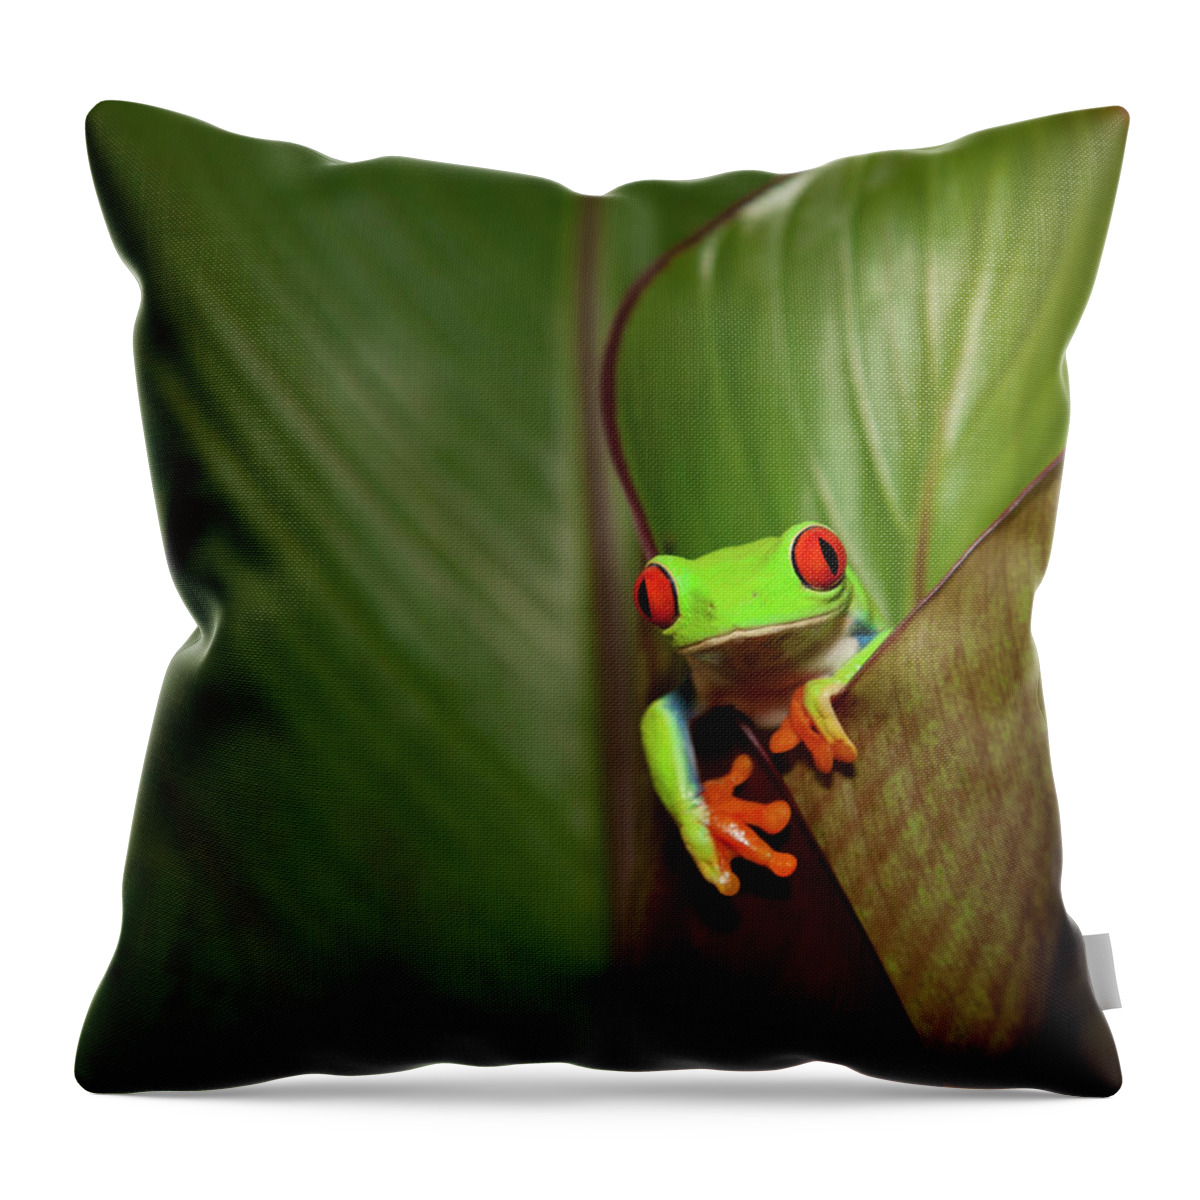 Hiding Throw Pillow featuring the photograph Frog On A Plant In Its Natural by Kerkla